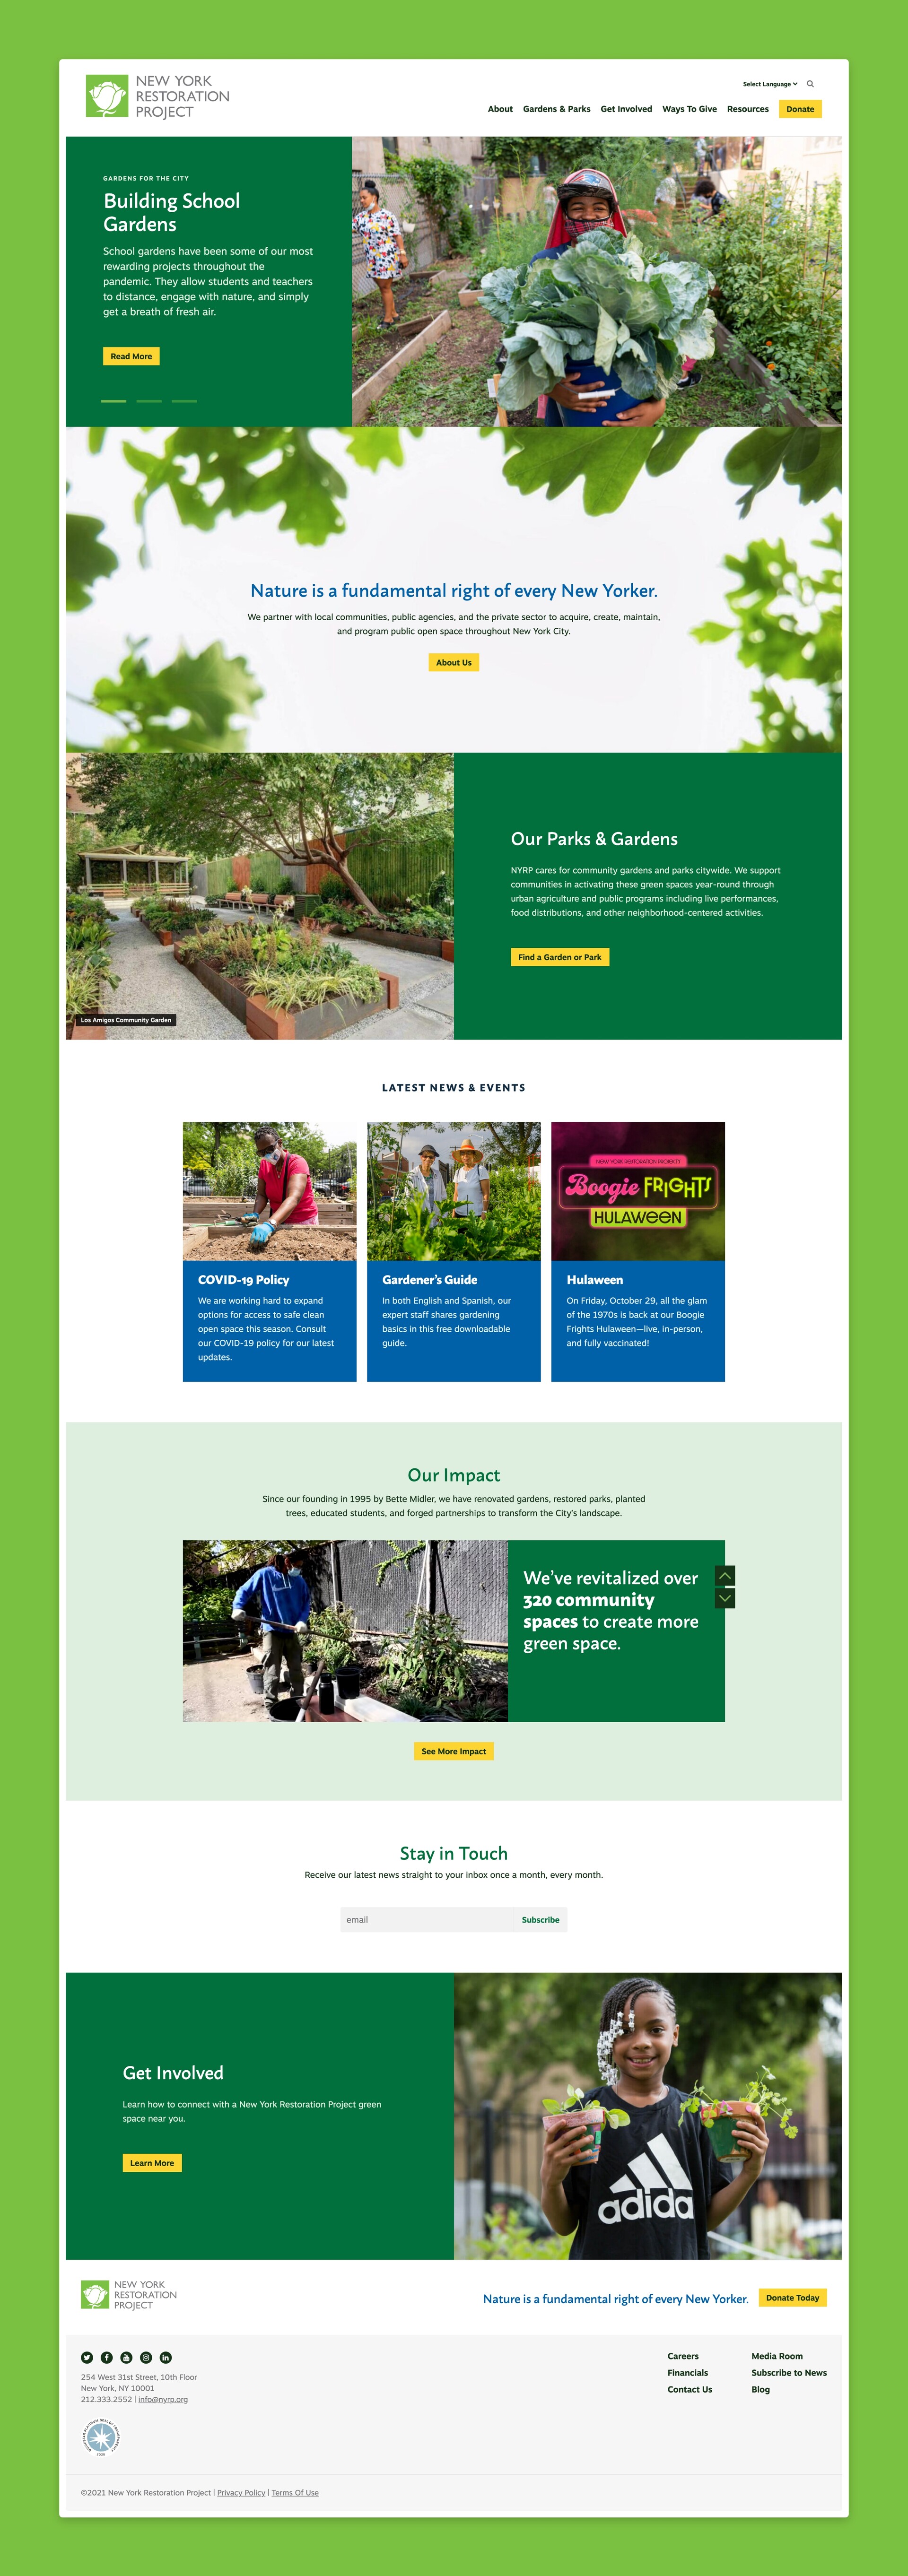 NYRP Website Design Full-Page